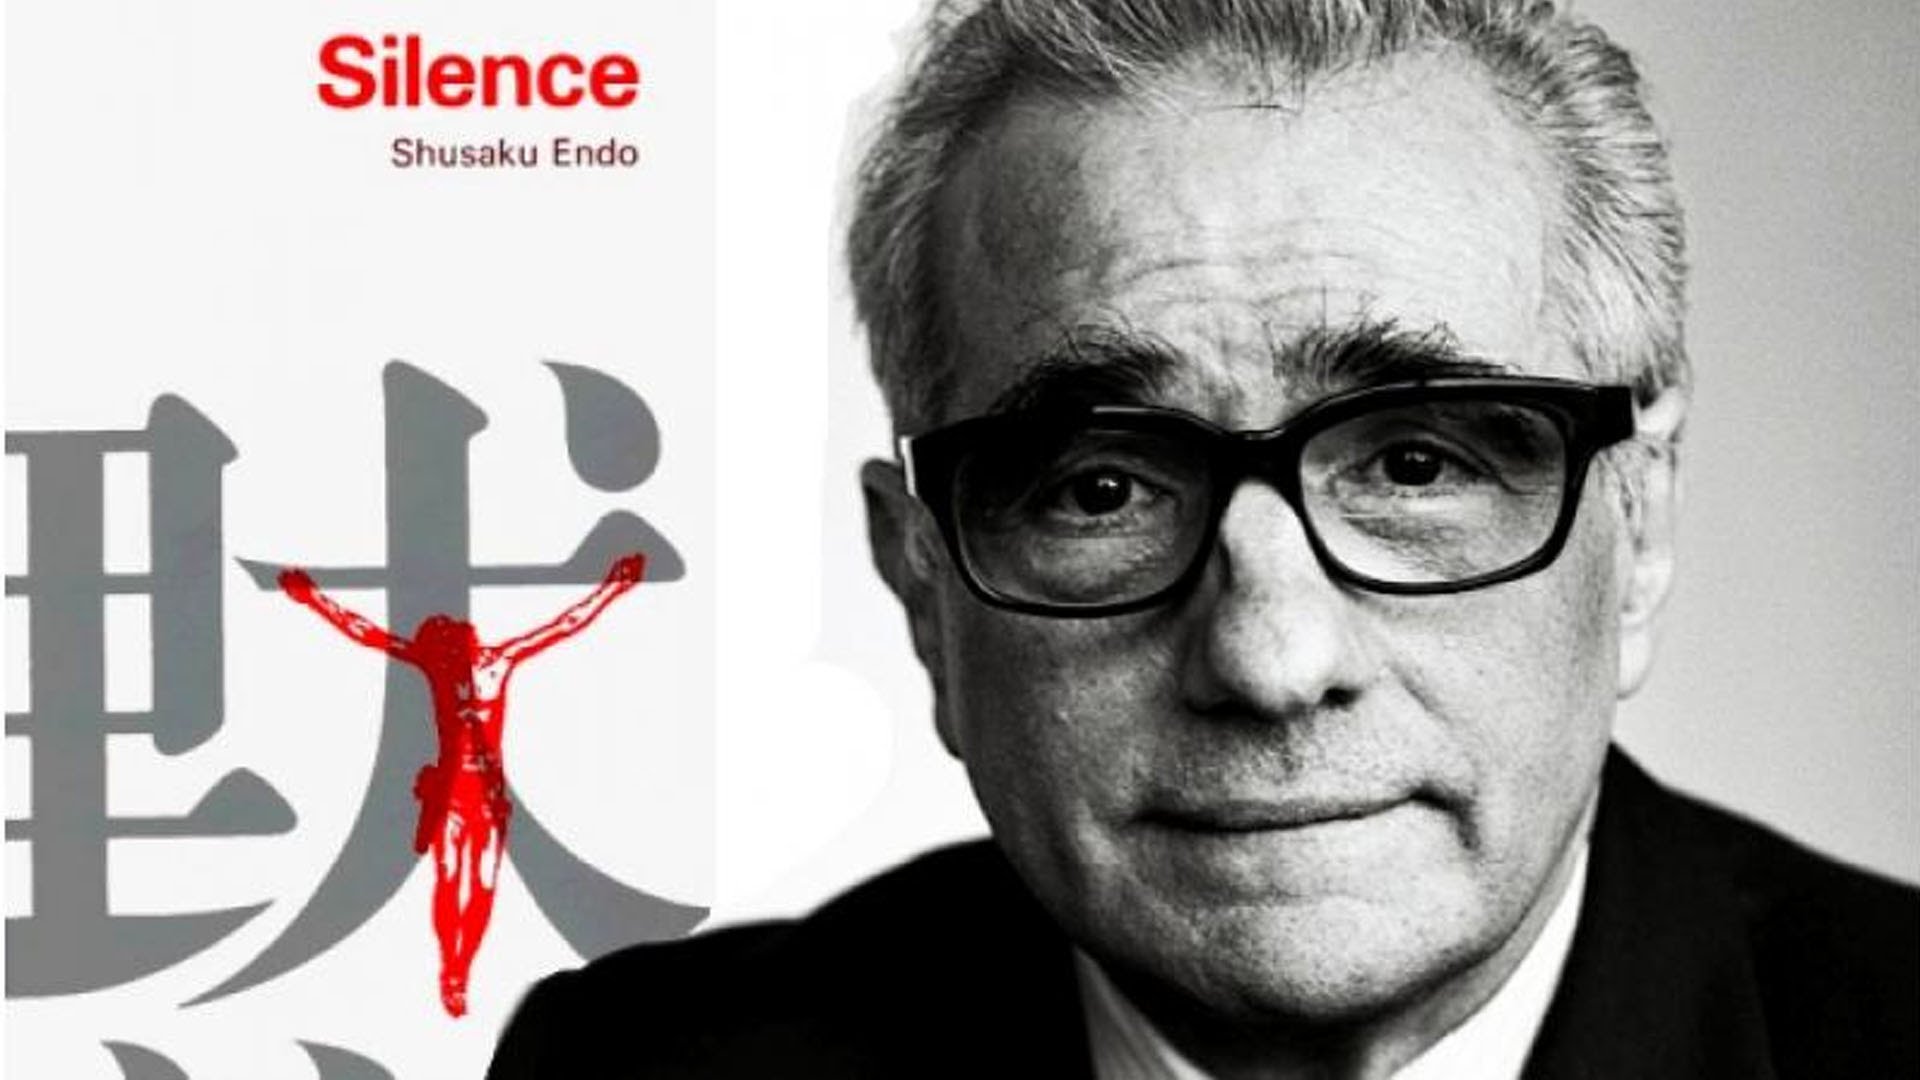 Martin Scorsese Backgrounds, Compatible - PC, Mobile, Gadgets| 1920x1080 px